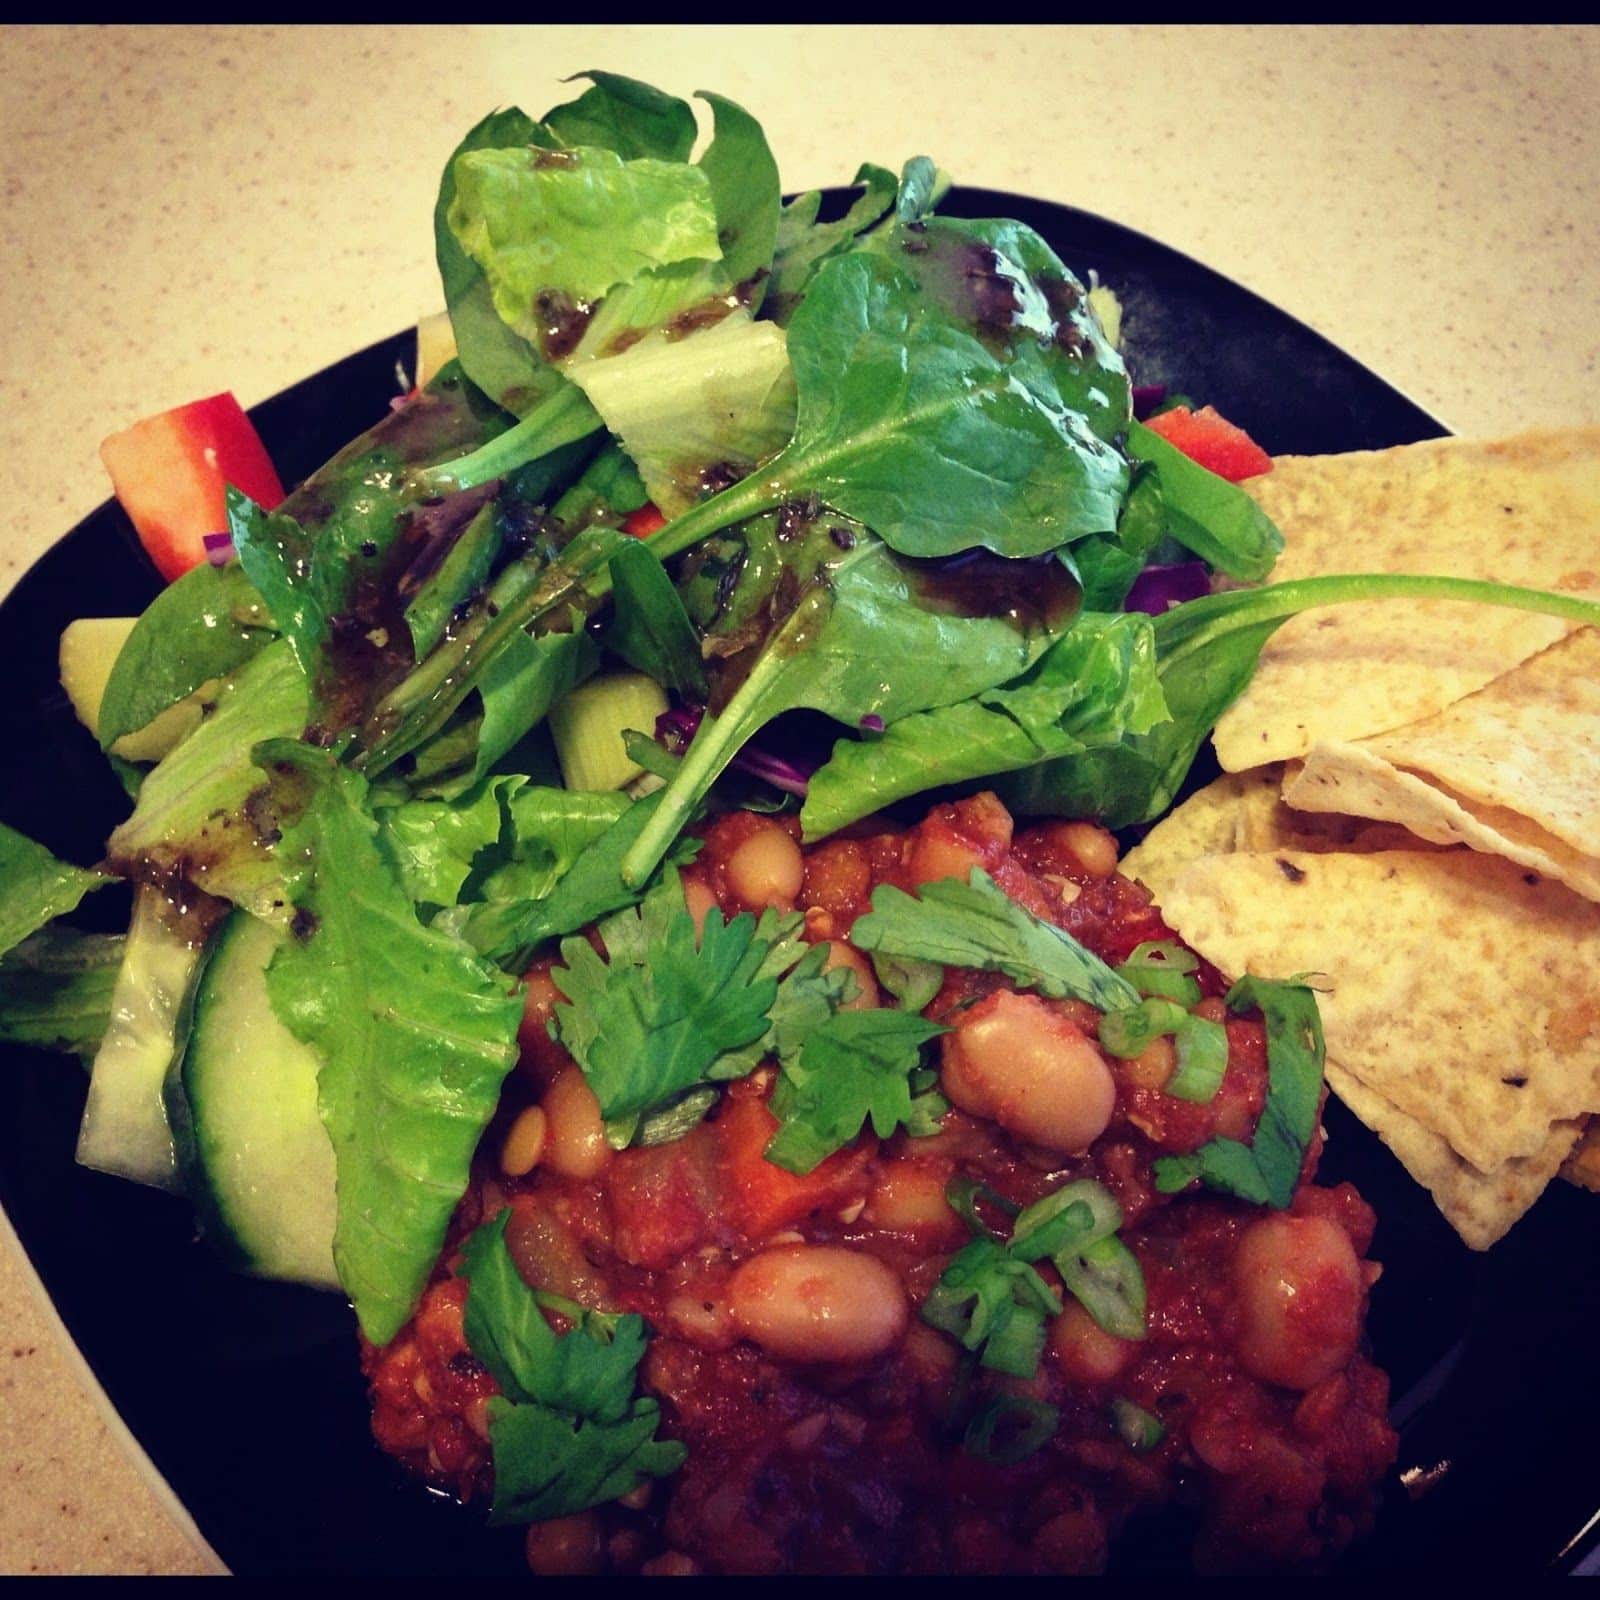 Hearty Vegetable Chili